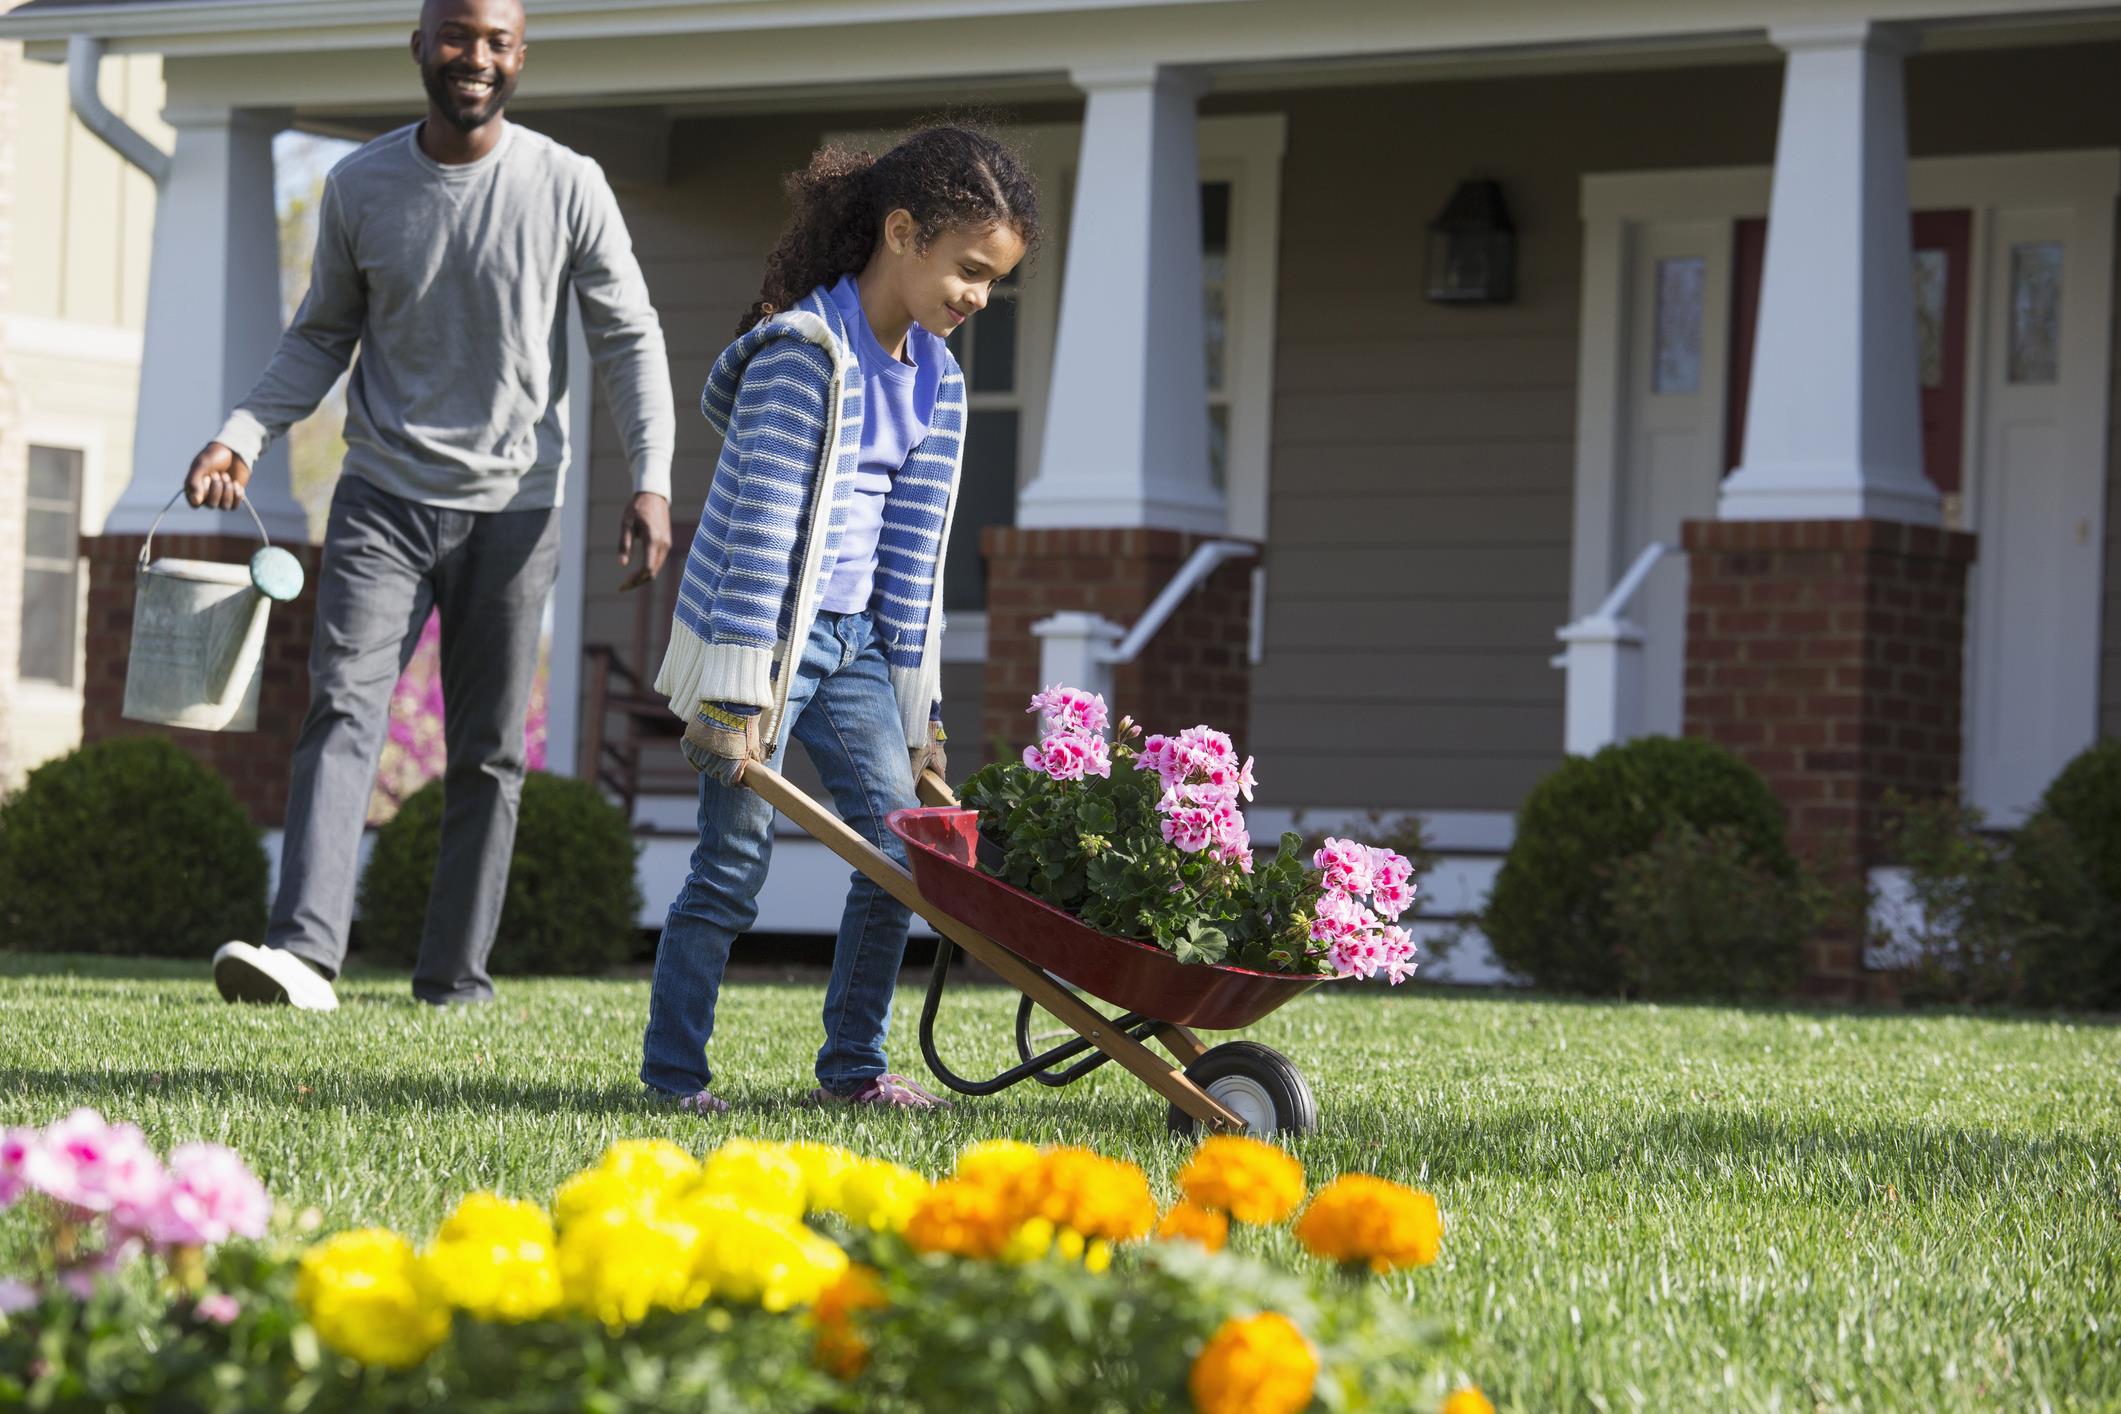 Make Your Mom Happy with These Landscaping Projects Tips on Mother’s Day 2018